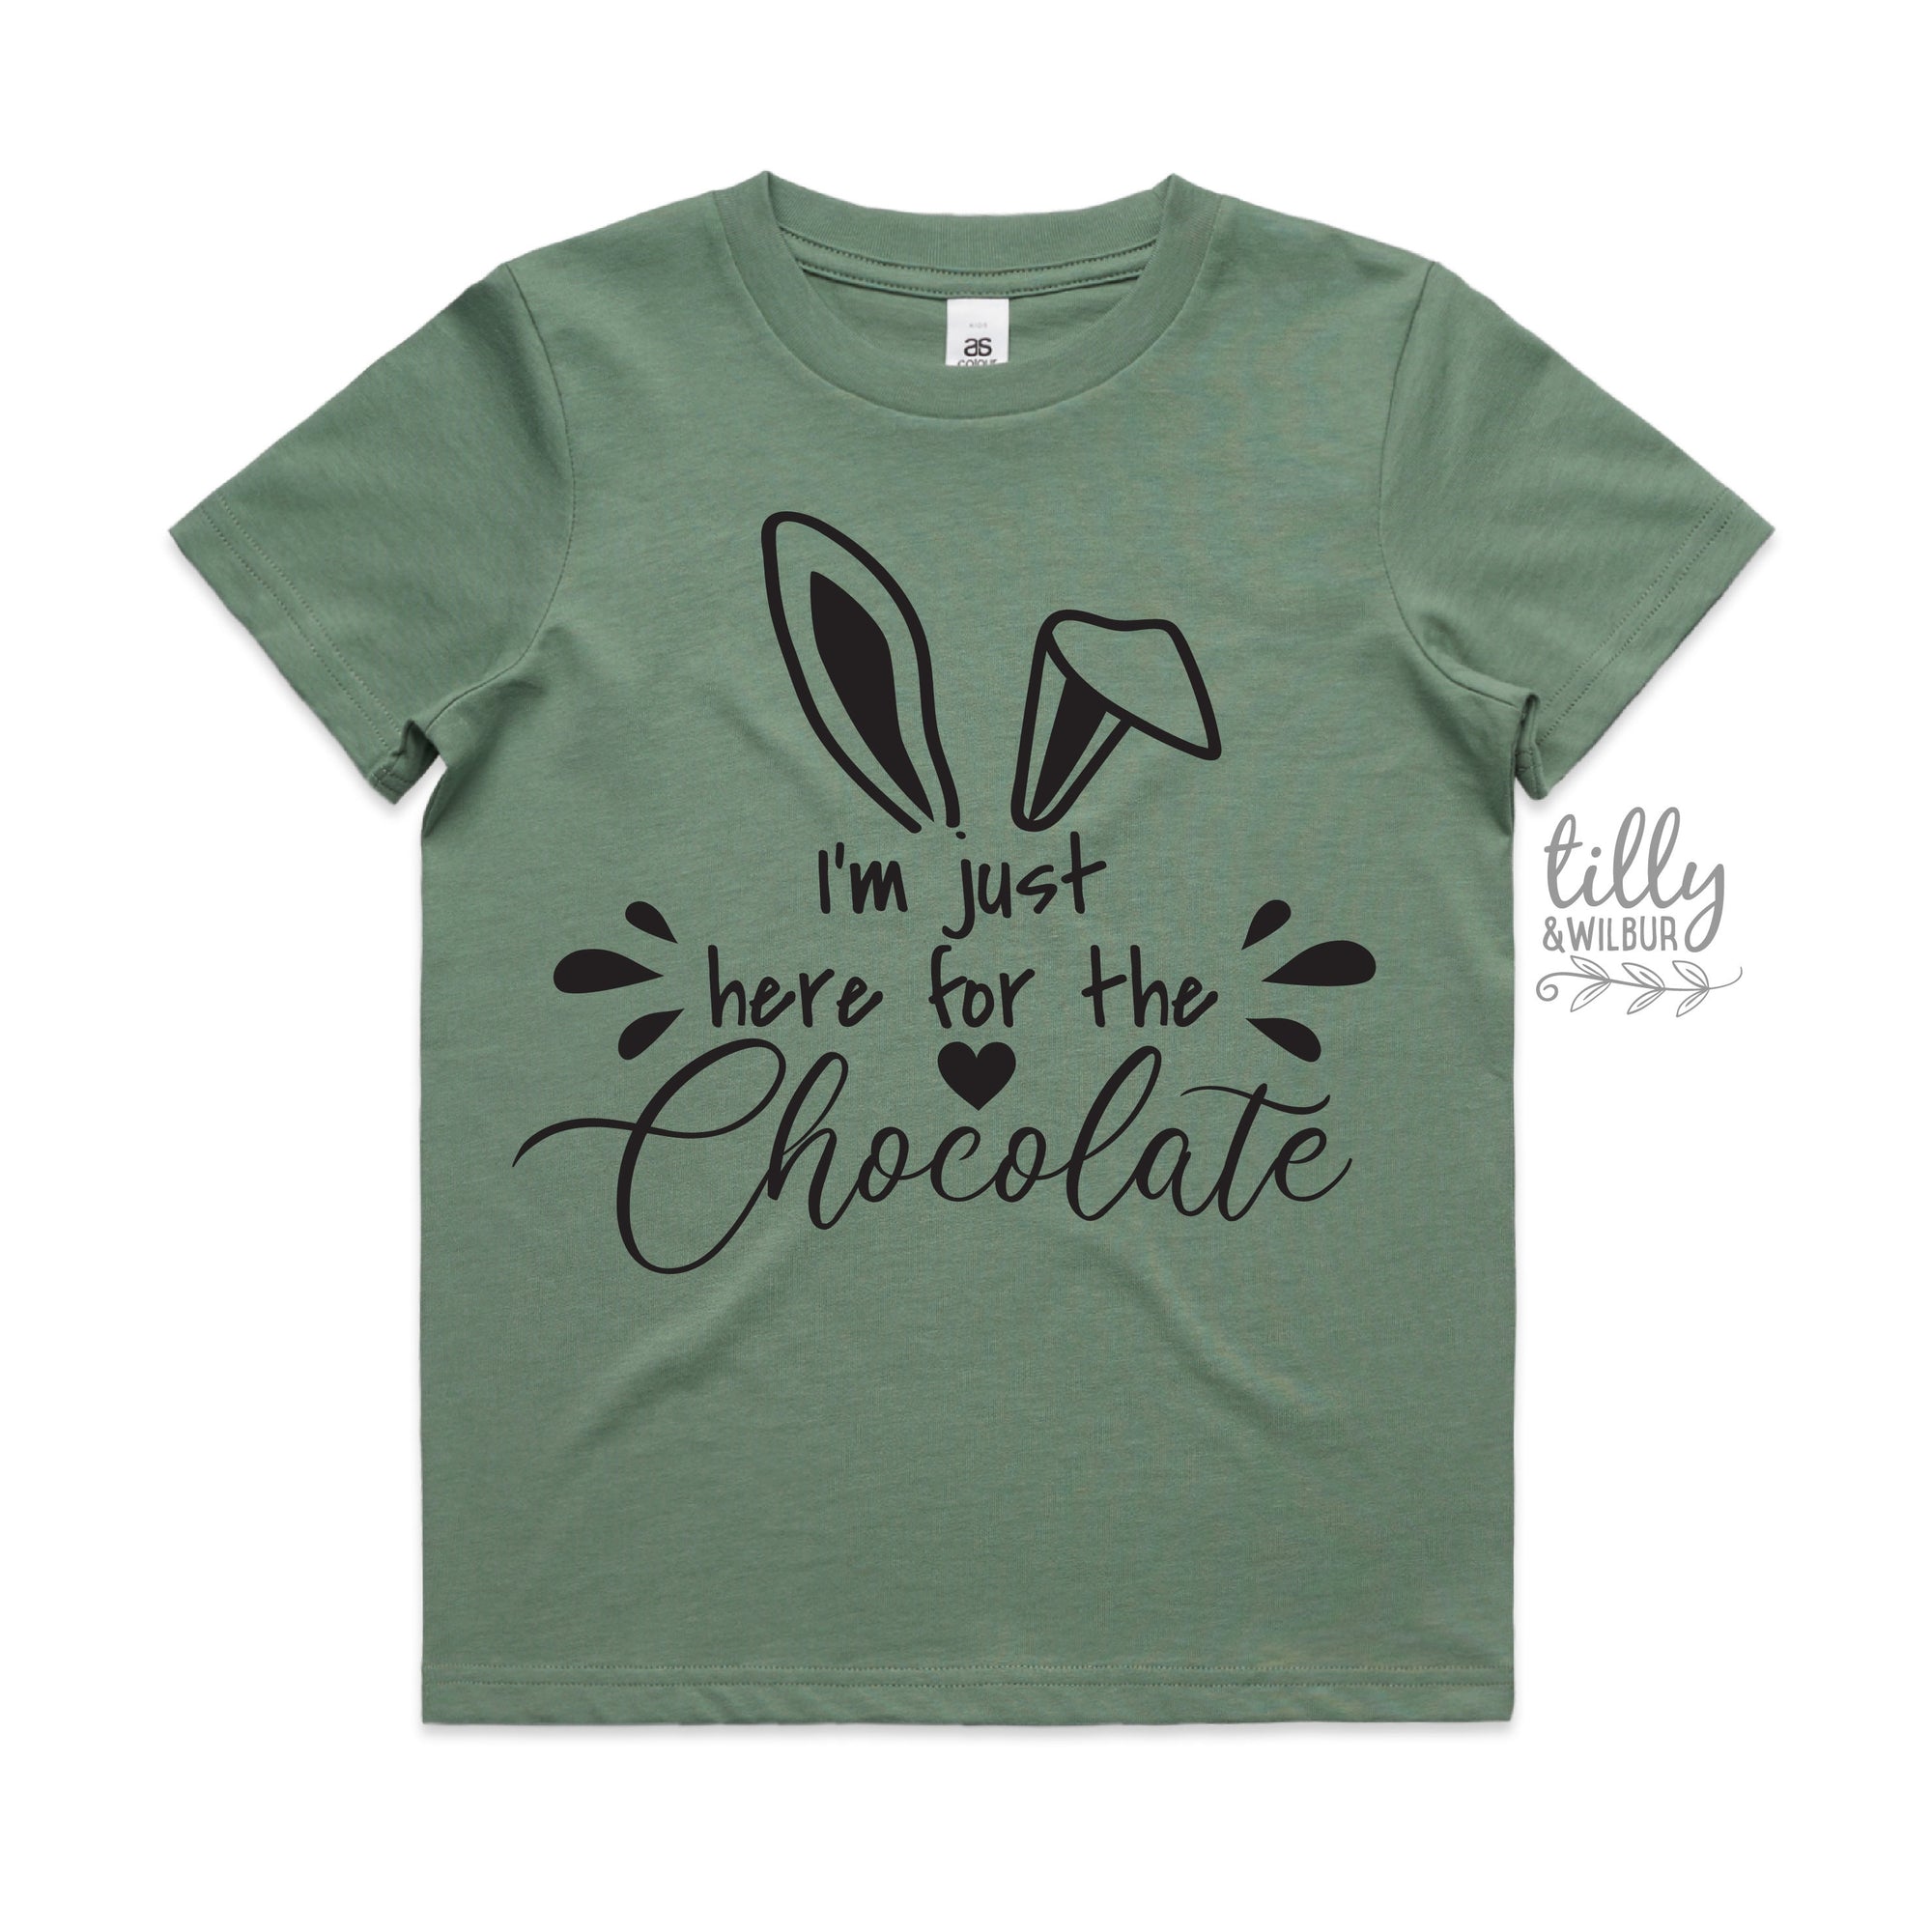 Easter T-Shirt, I'm Just Here For The Chocolate T-Shirt, Easter Egg Hunt T-Shirt, Easter Gift, Chocolate Lover Easter T-Shirt, Funny Easter